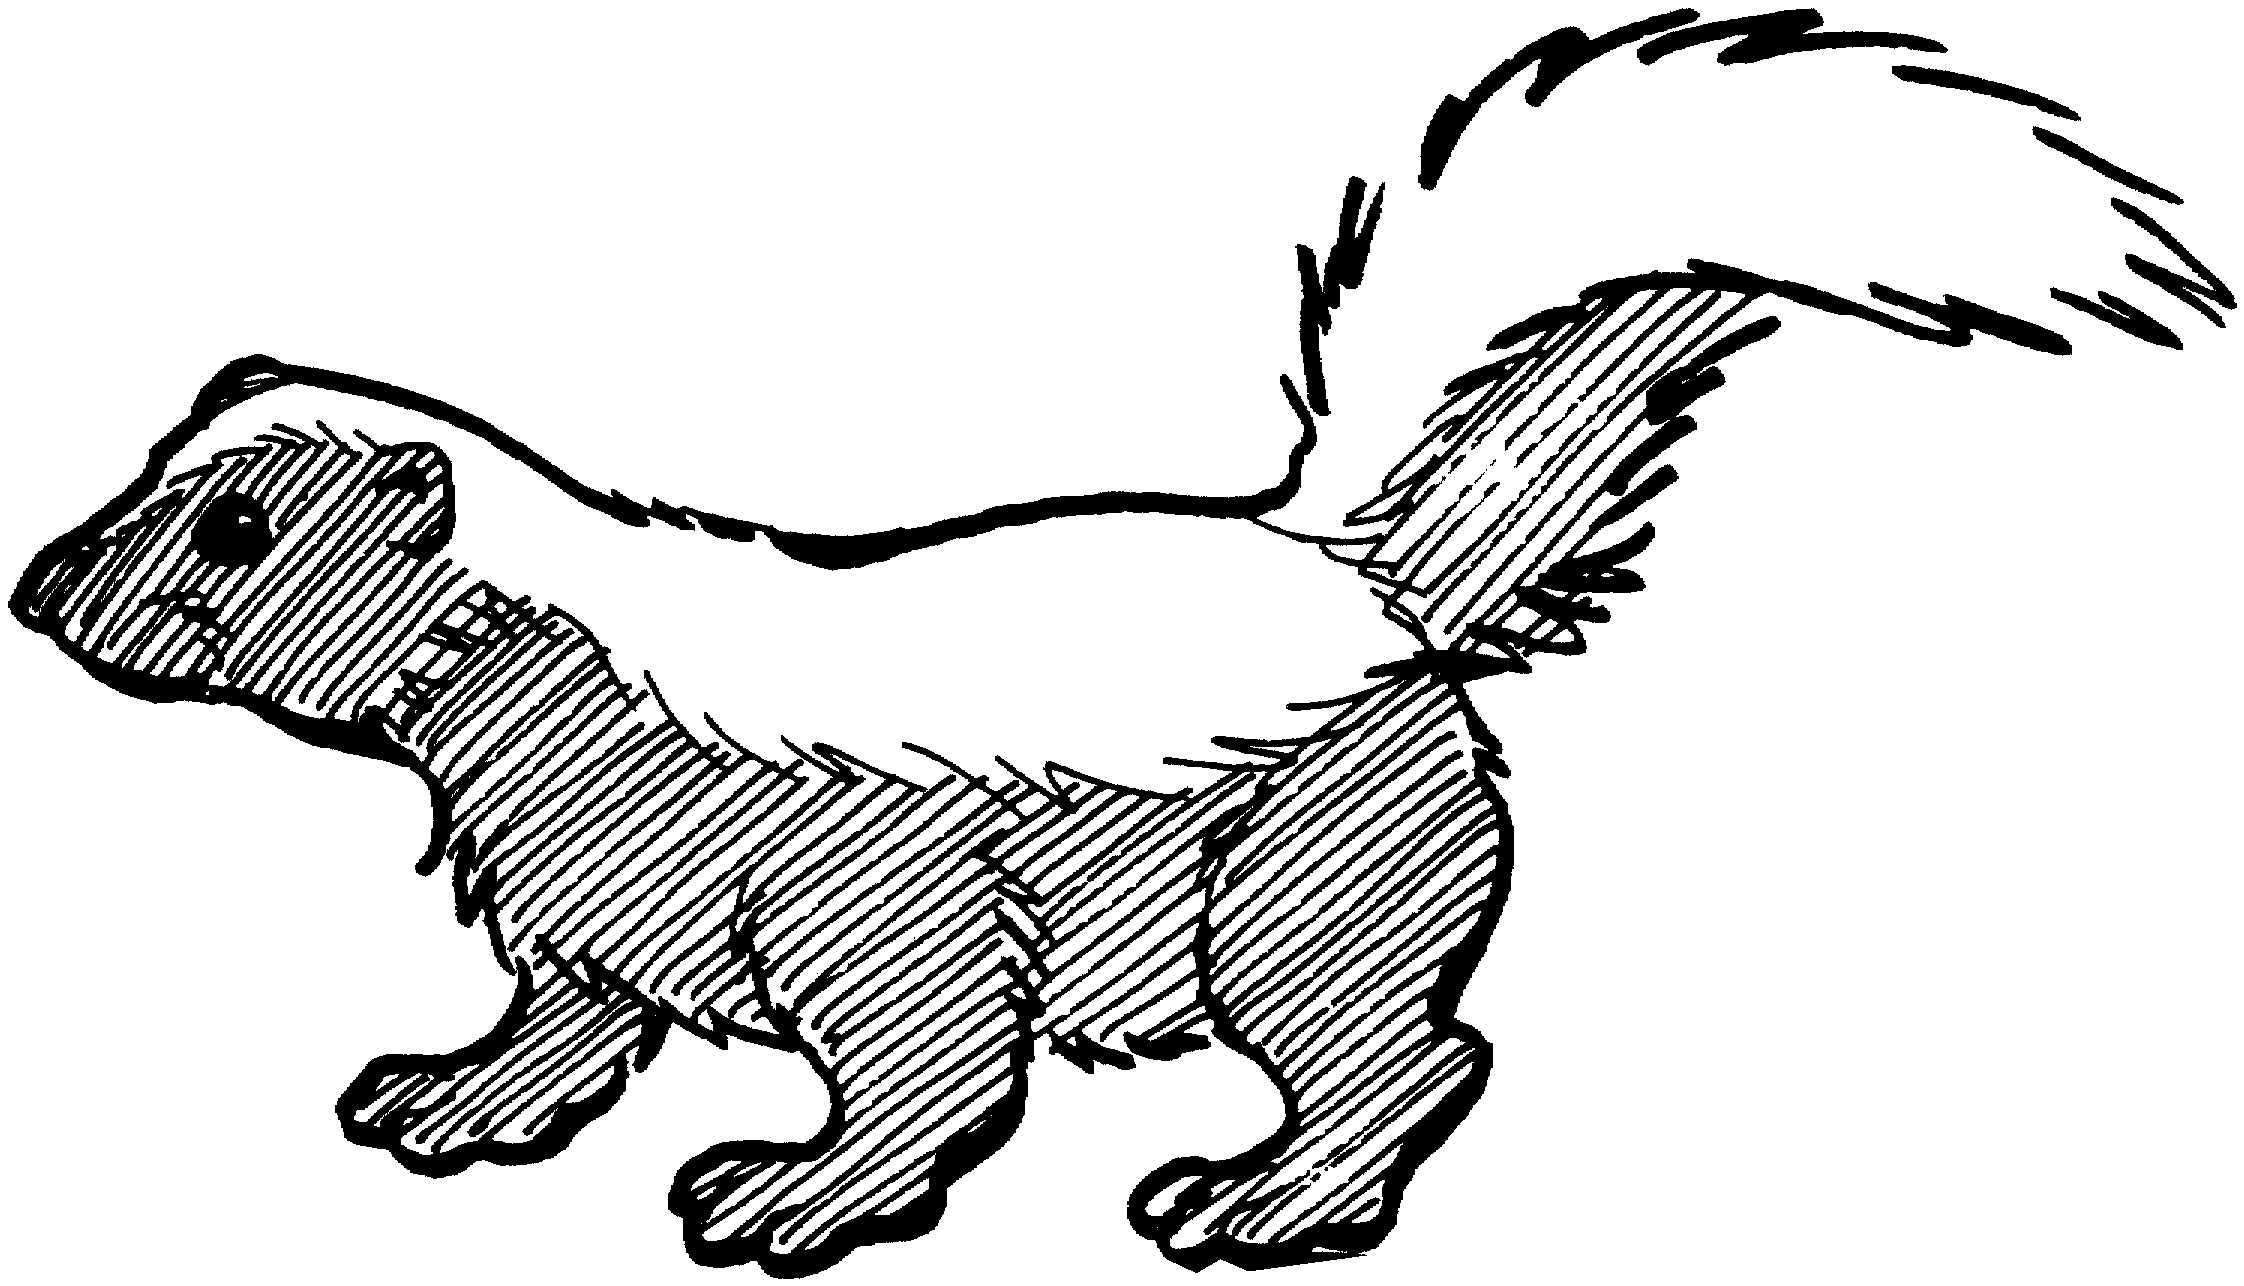 Cute black and white skunk clipart 